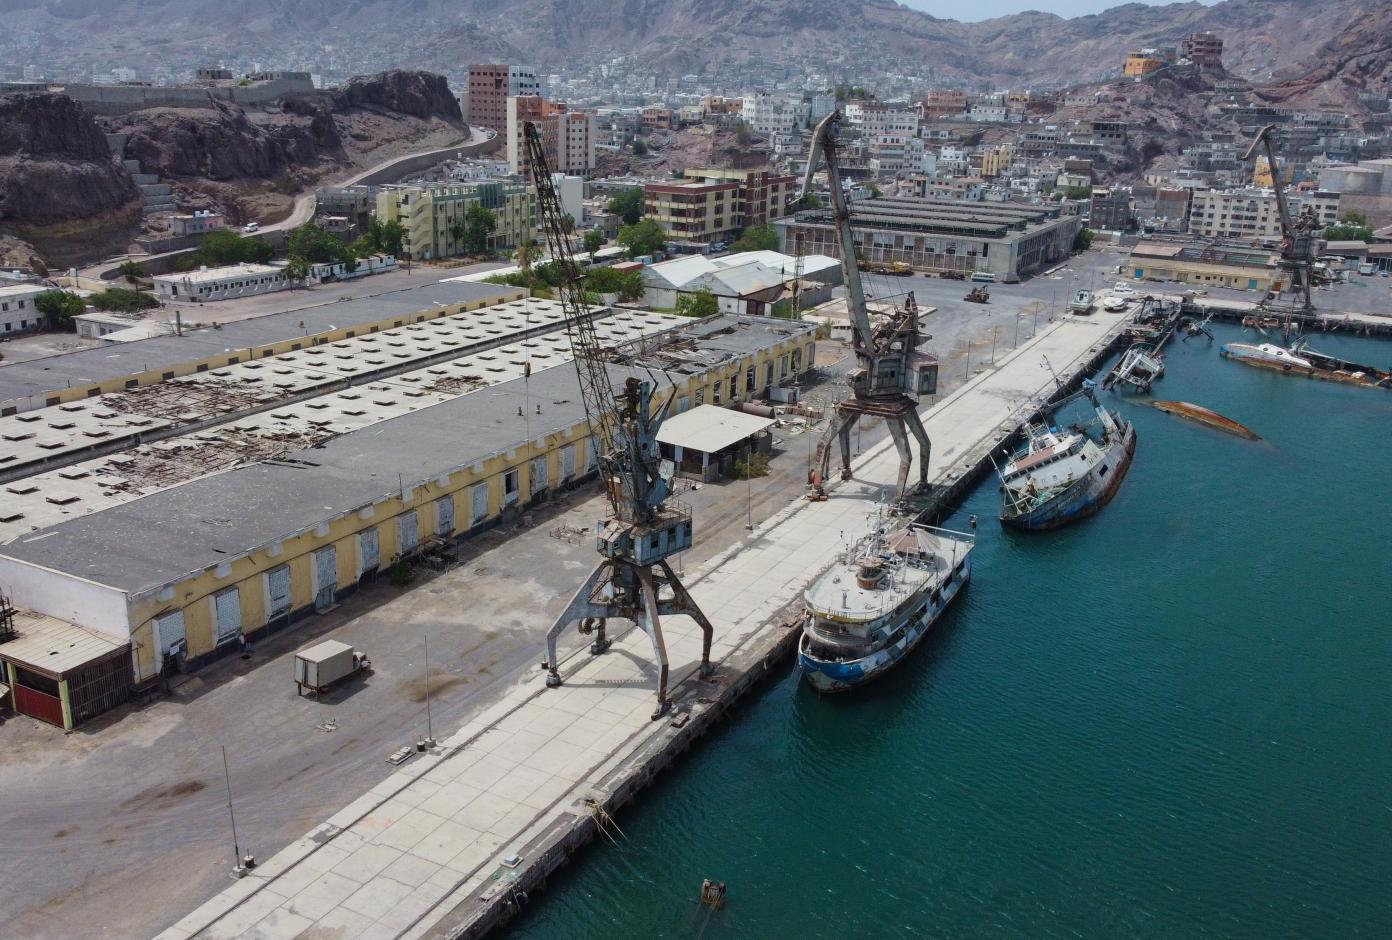 Rehabilitation of Aden’s Fishing Port and Development of the Value Chain